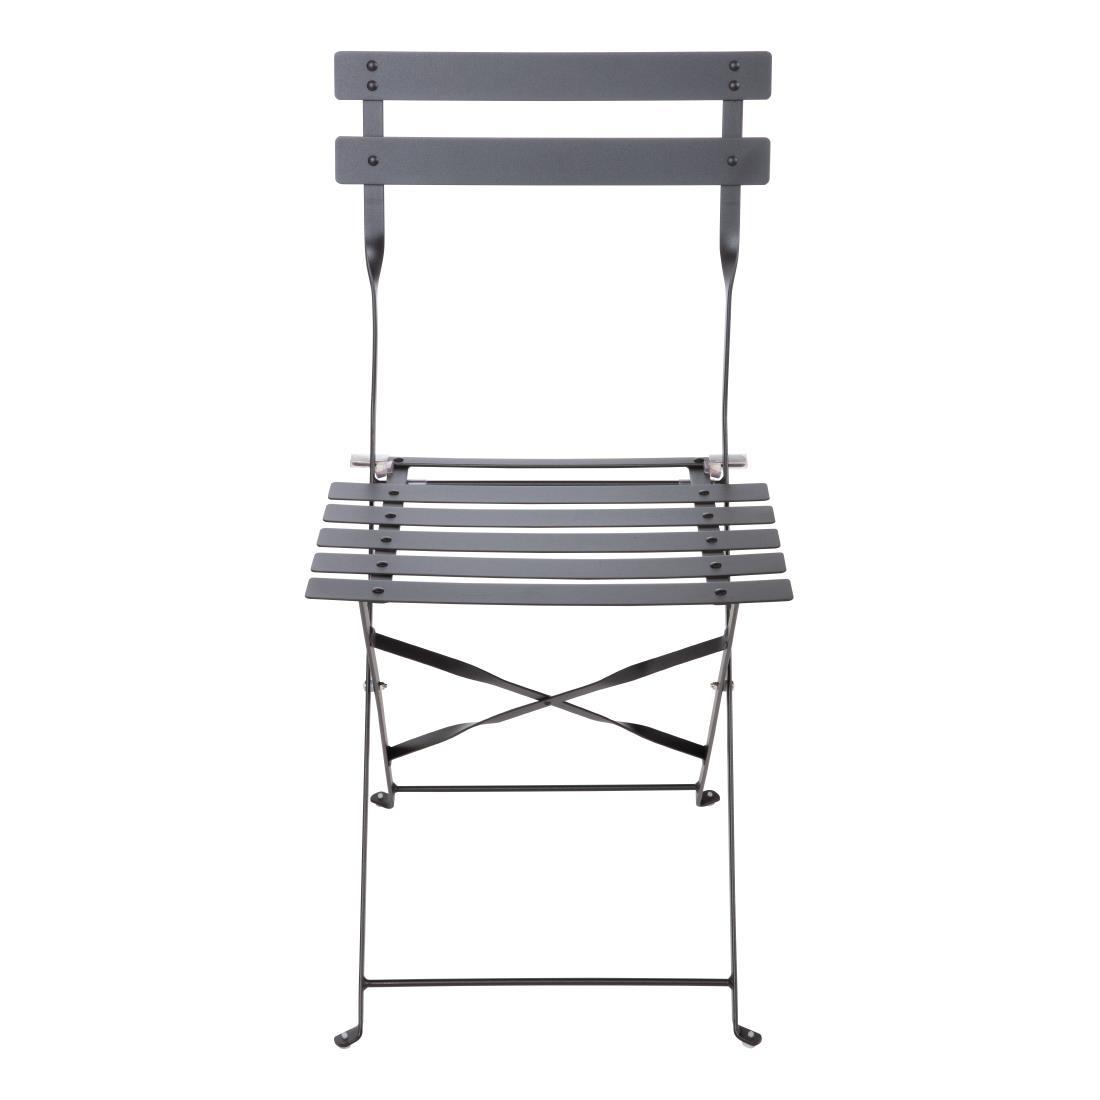 Bolero Black Pavement Style Steel Chairs (Pack of 2) - GH553  - 2